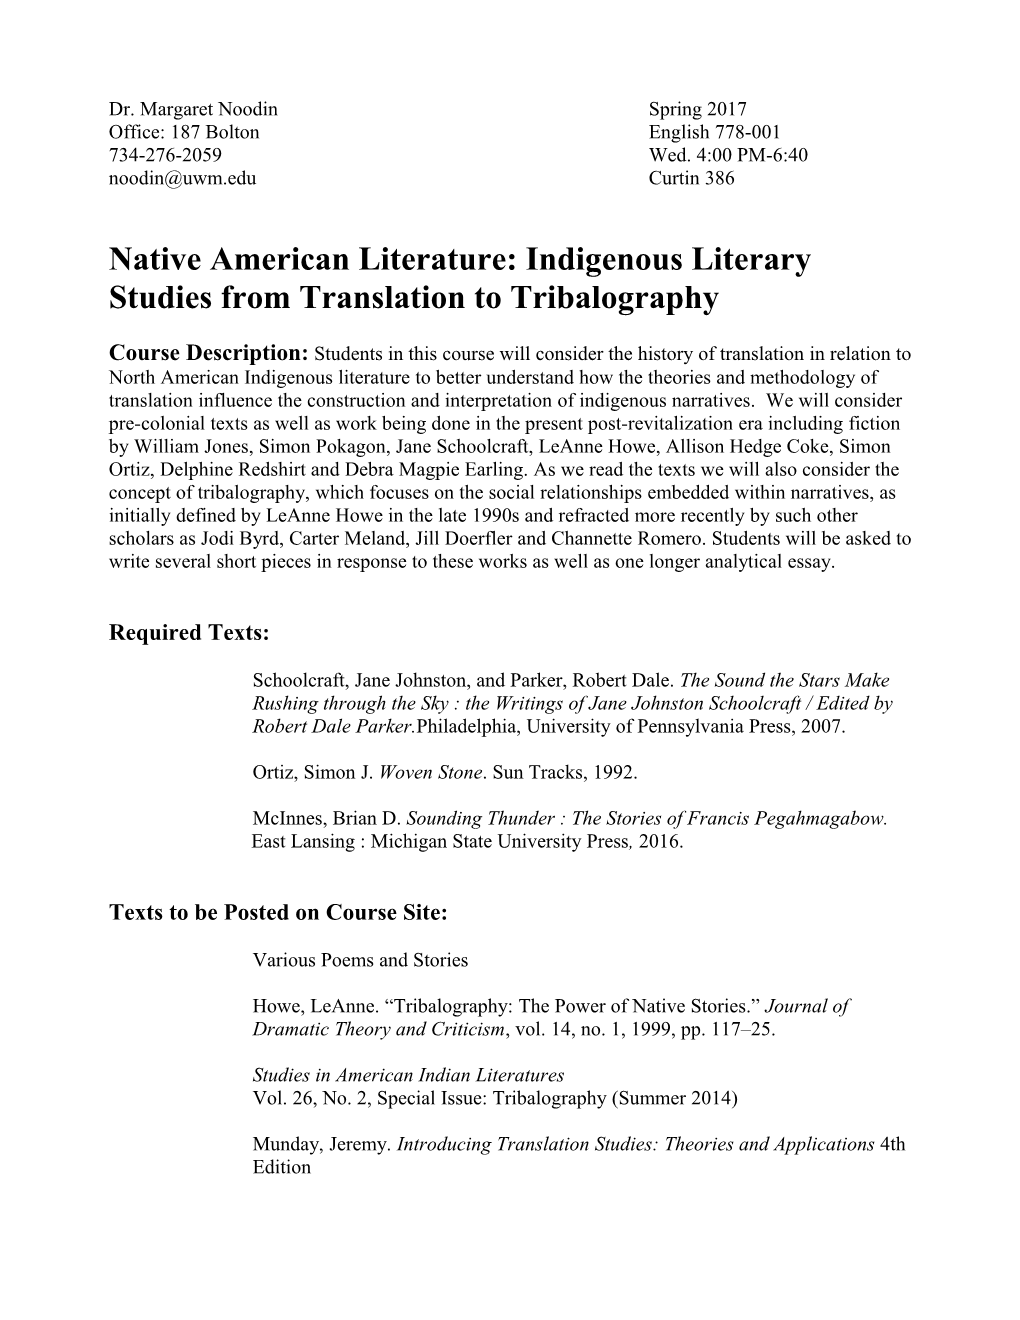 Native American Literature: Indigenous Literary Studies from Translation to Tribalography